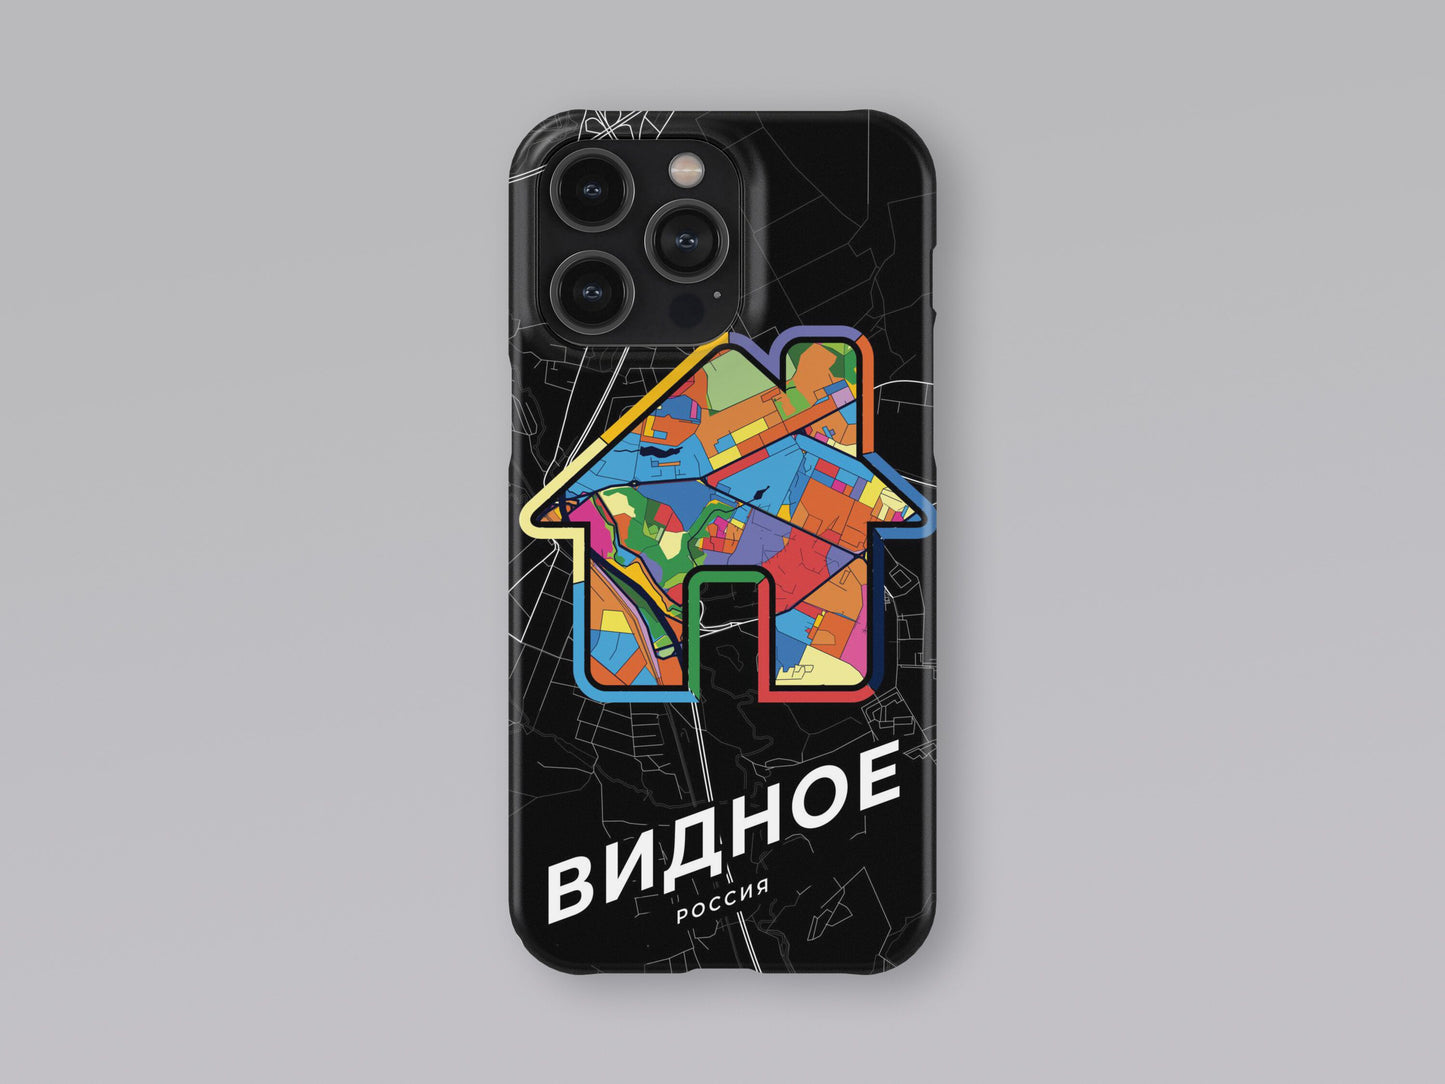 Vidnoye Russia slim phone case with colorful icon 3